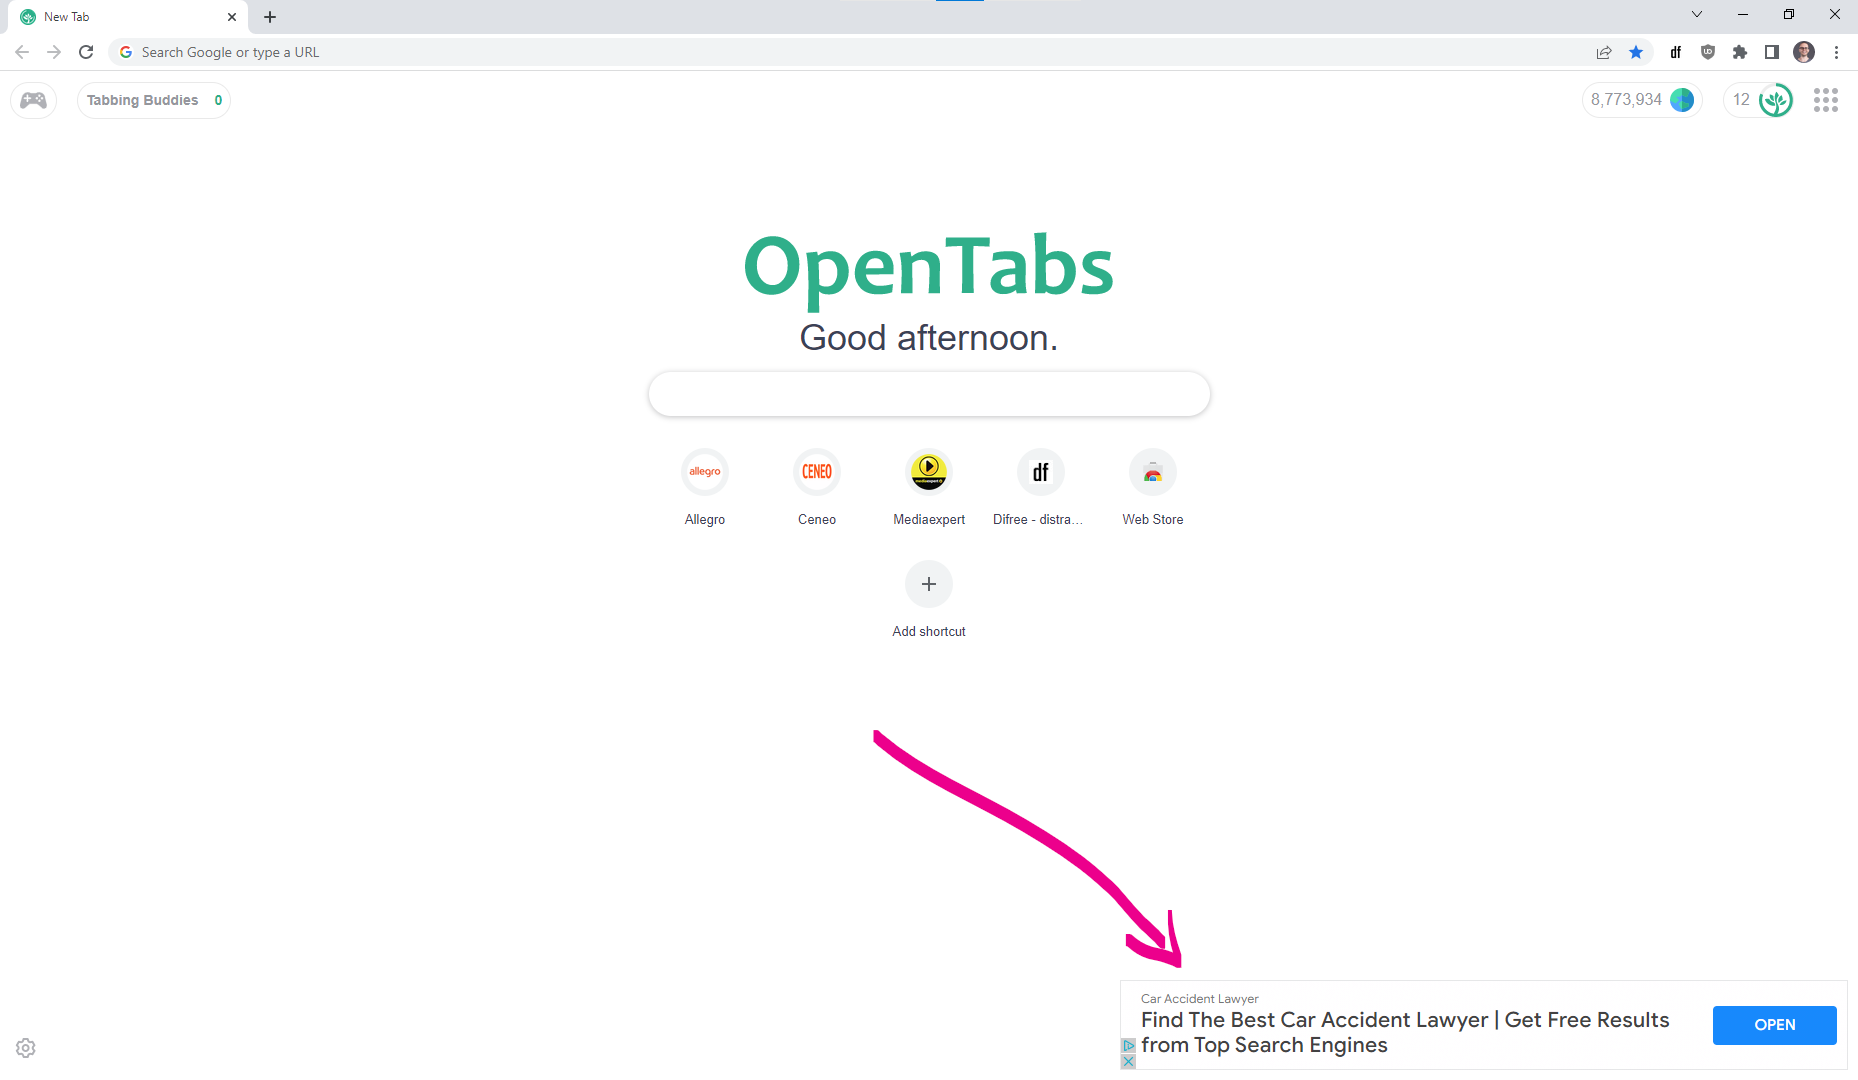 OpenTabs: an ad in bottom-right corner